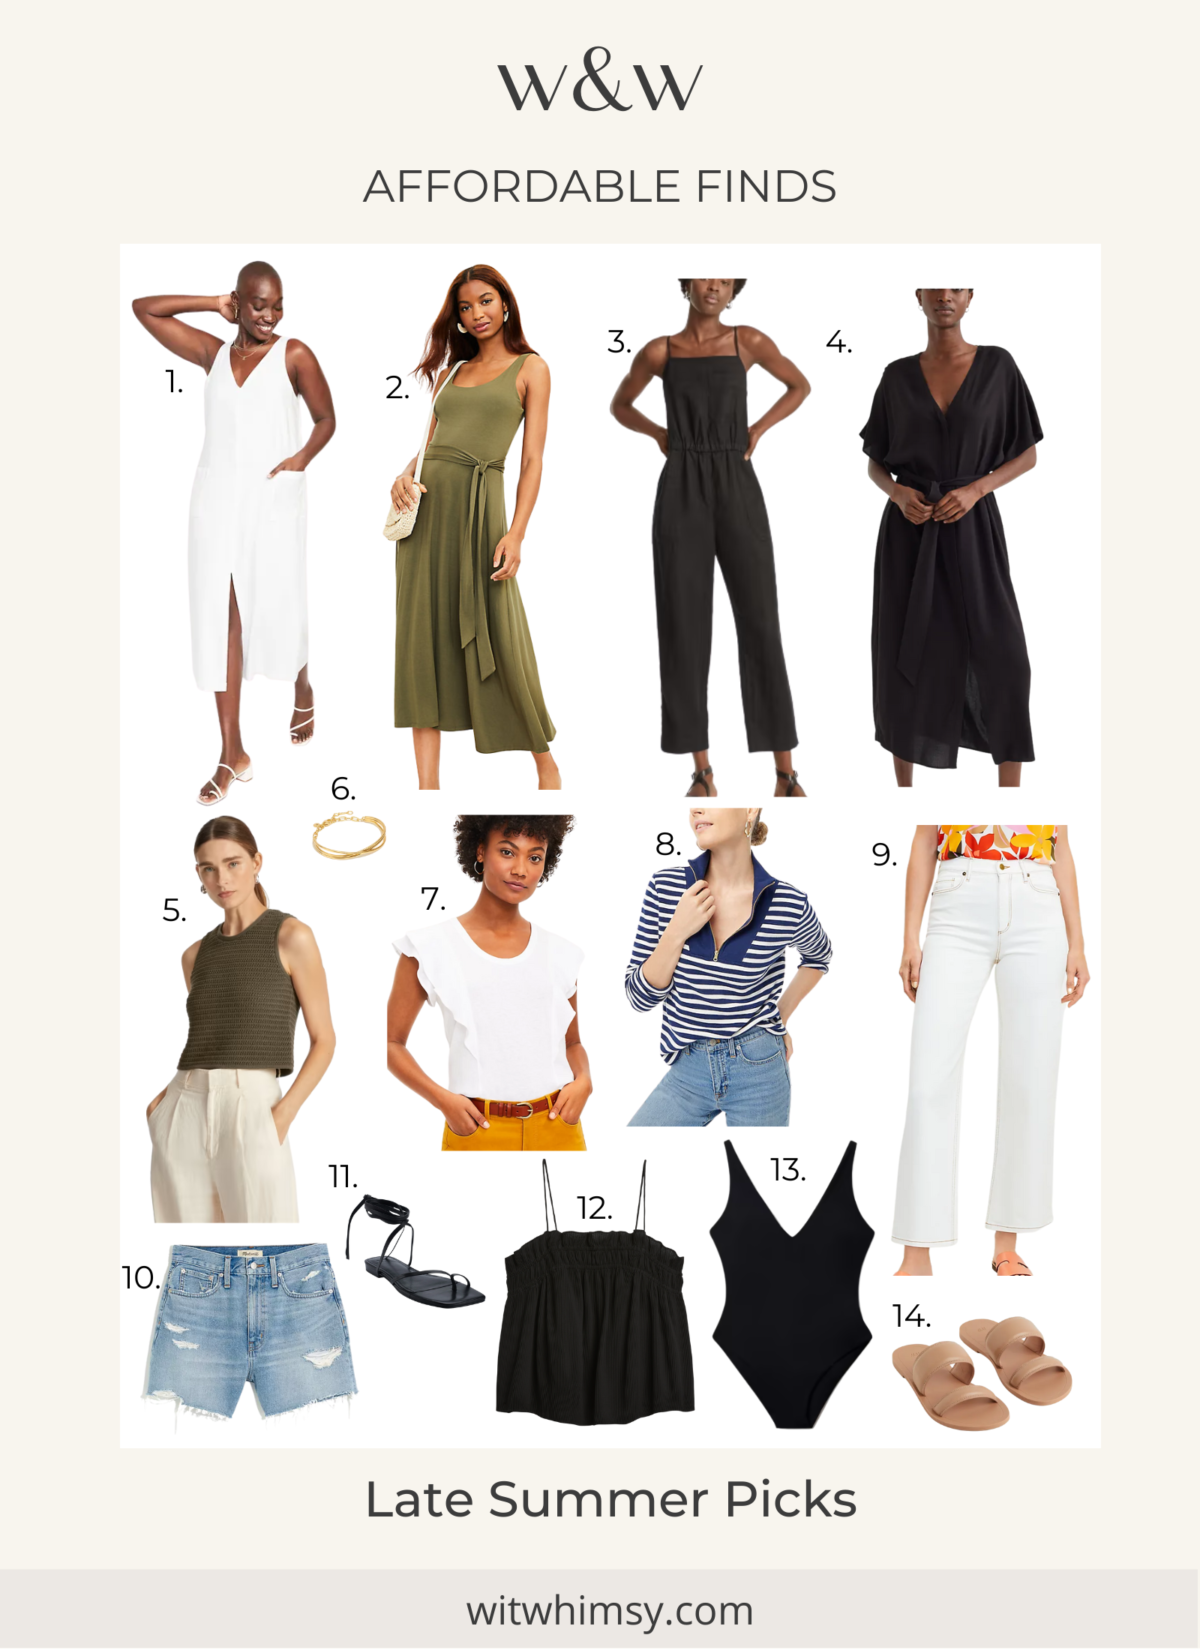 Late Summer Fashion Finds